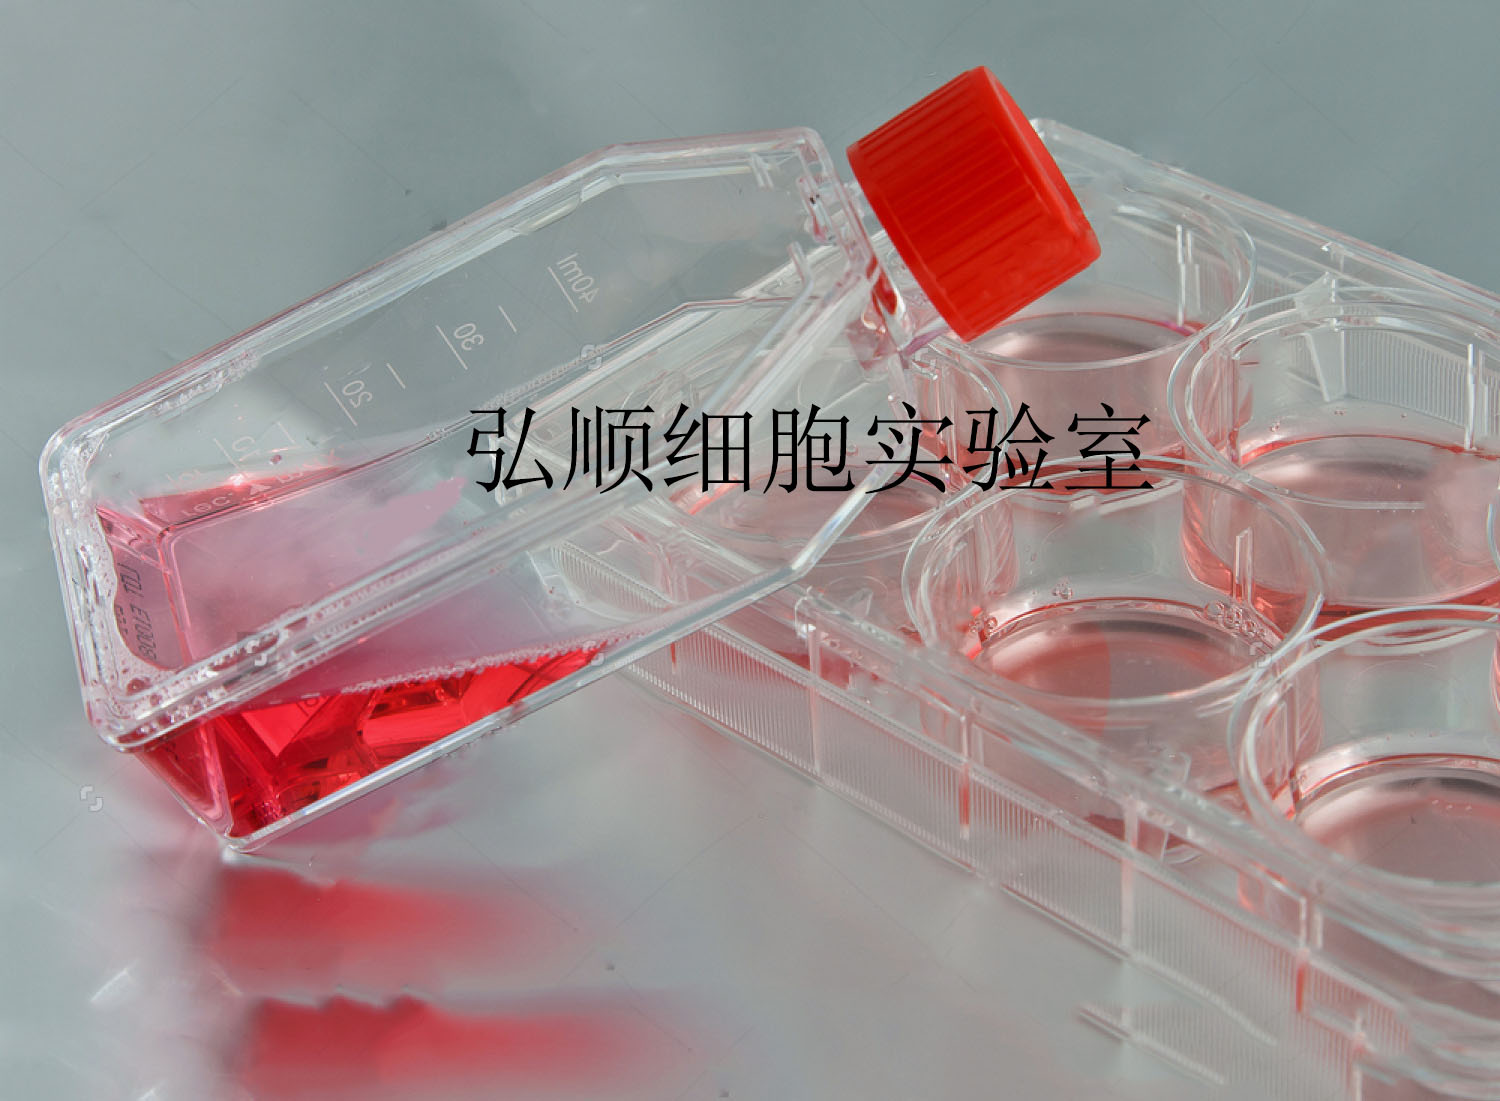 EAhy926 Cell Line|人脐静脉融合细胞,EAhy926 Cell Line